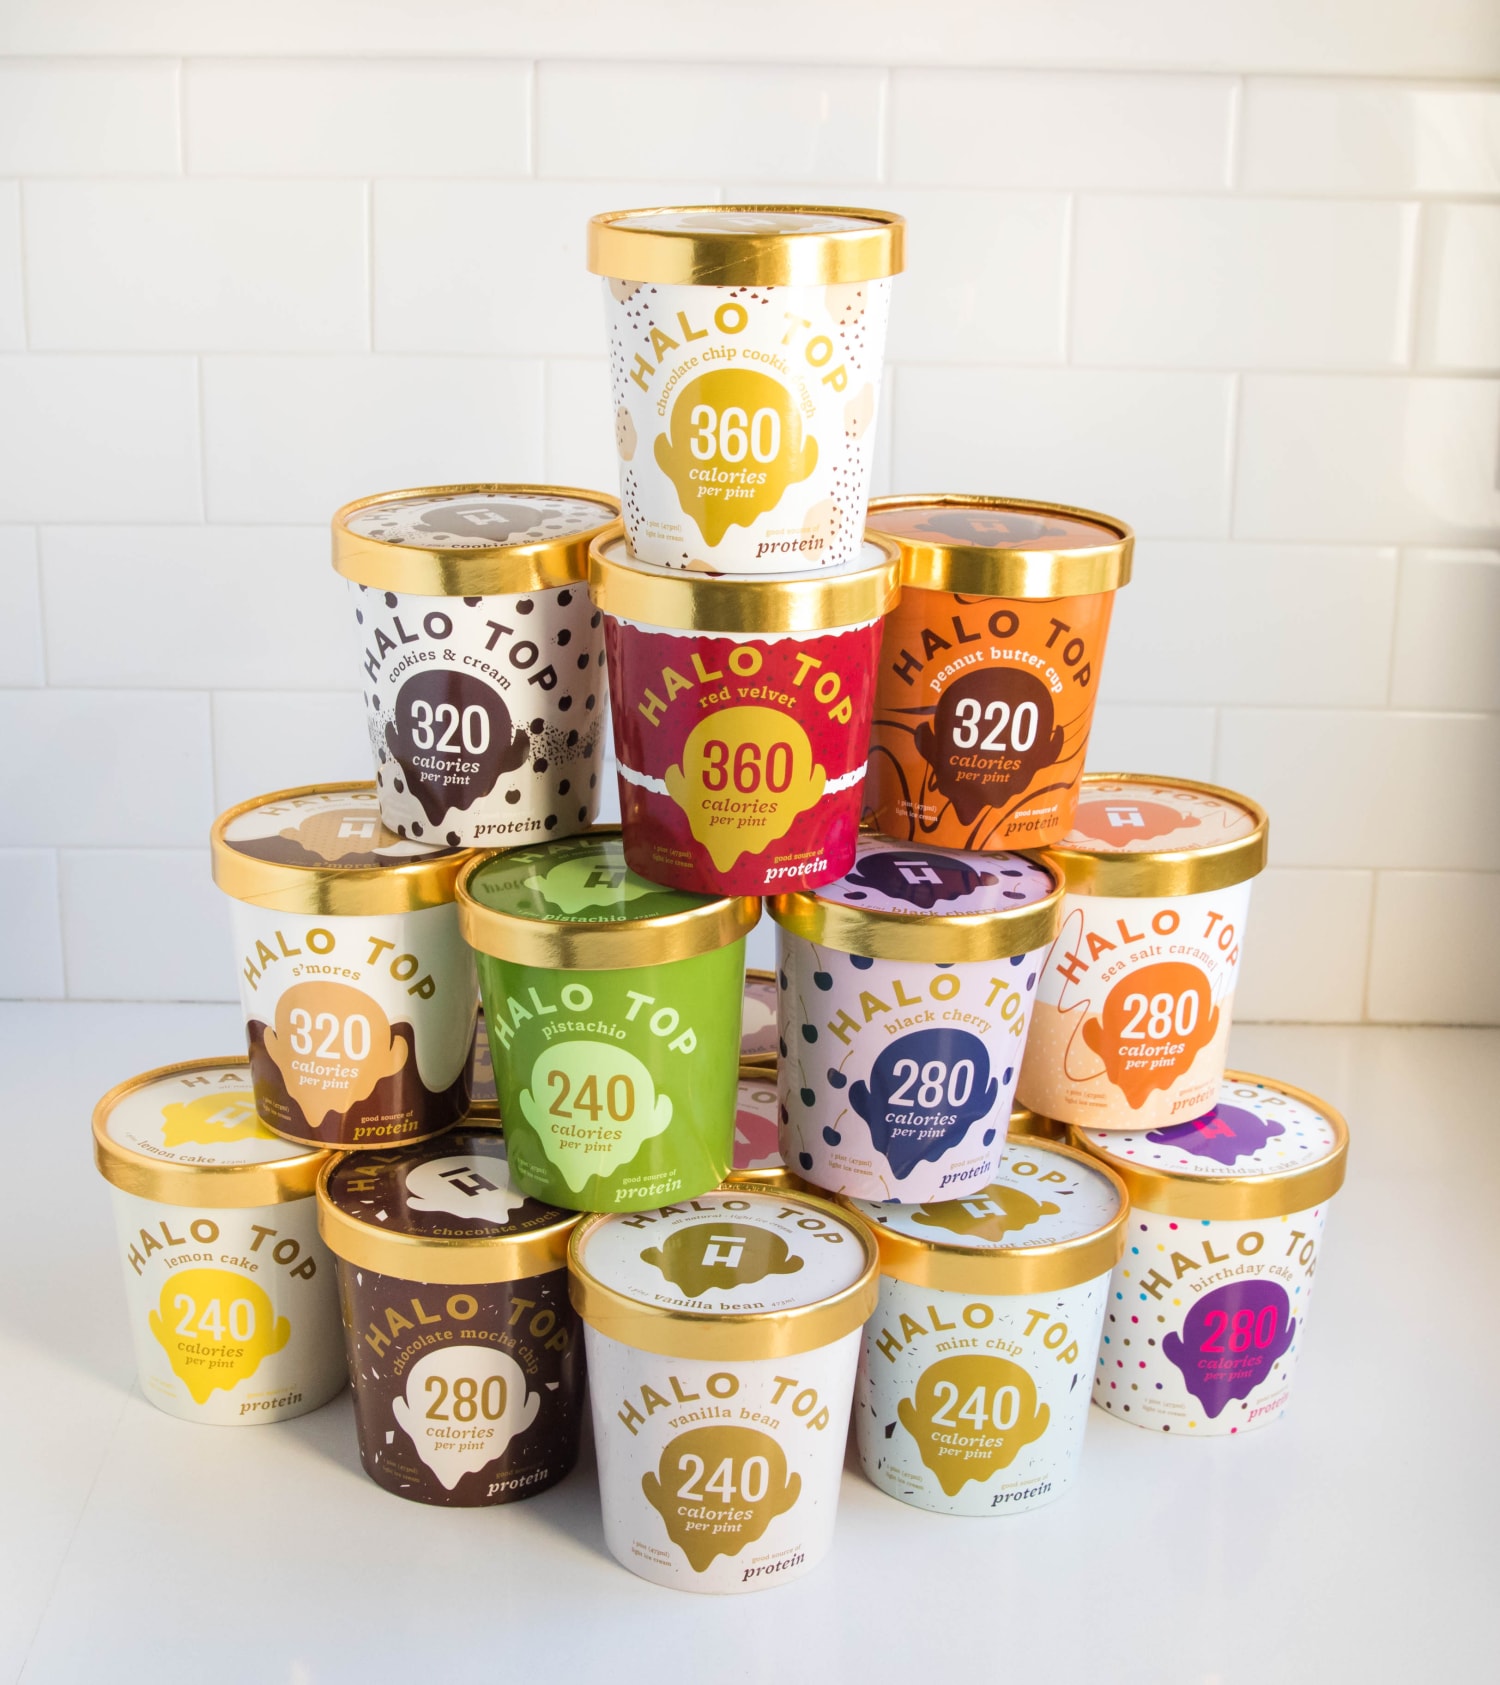 Halo Top ice cream: Does taste as good as the real deal?